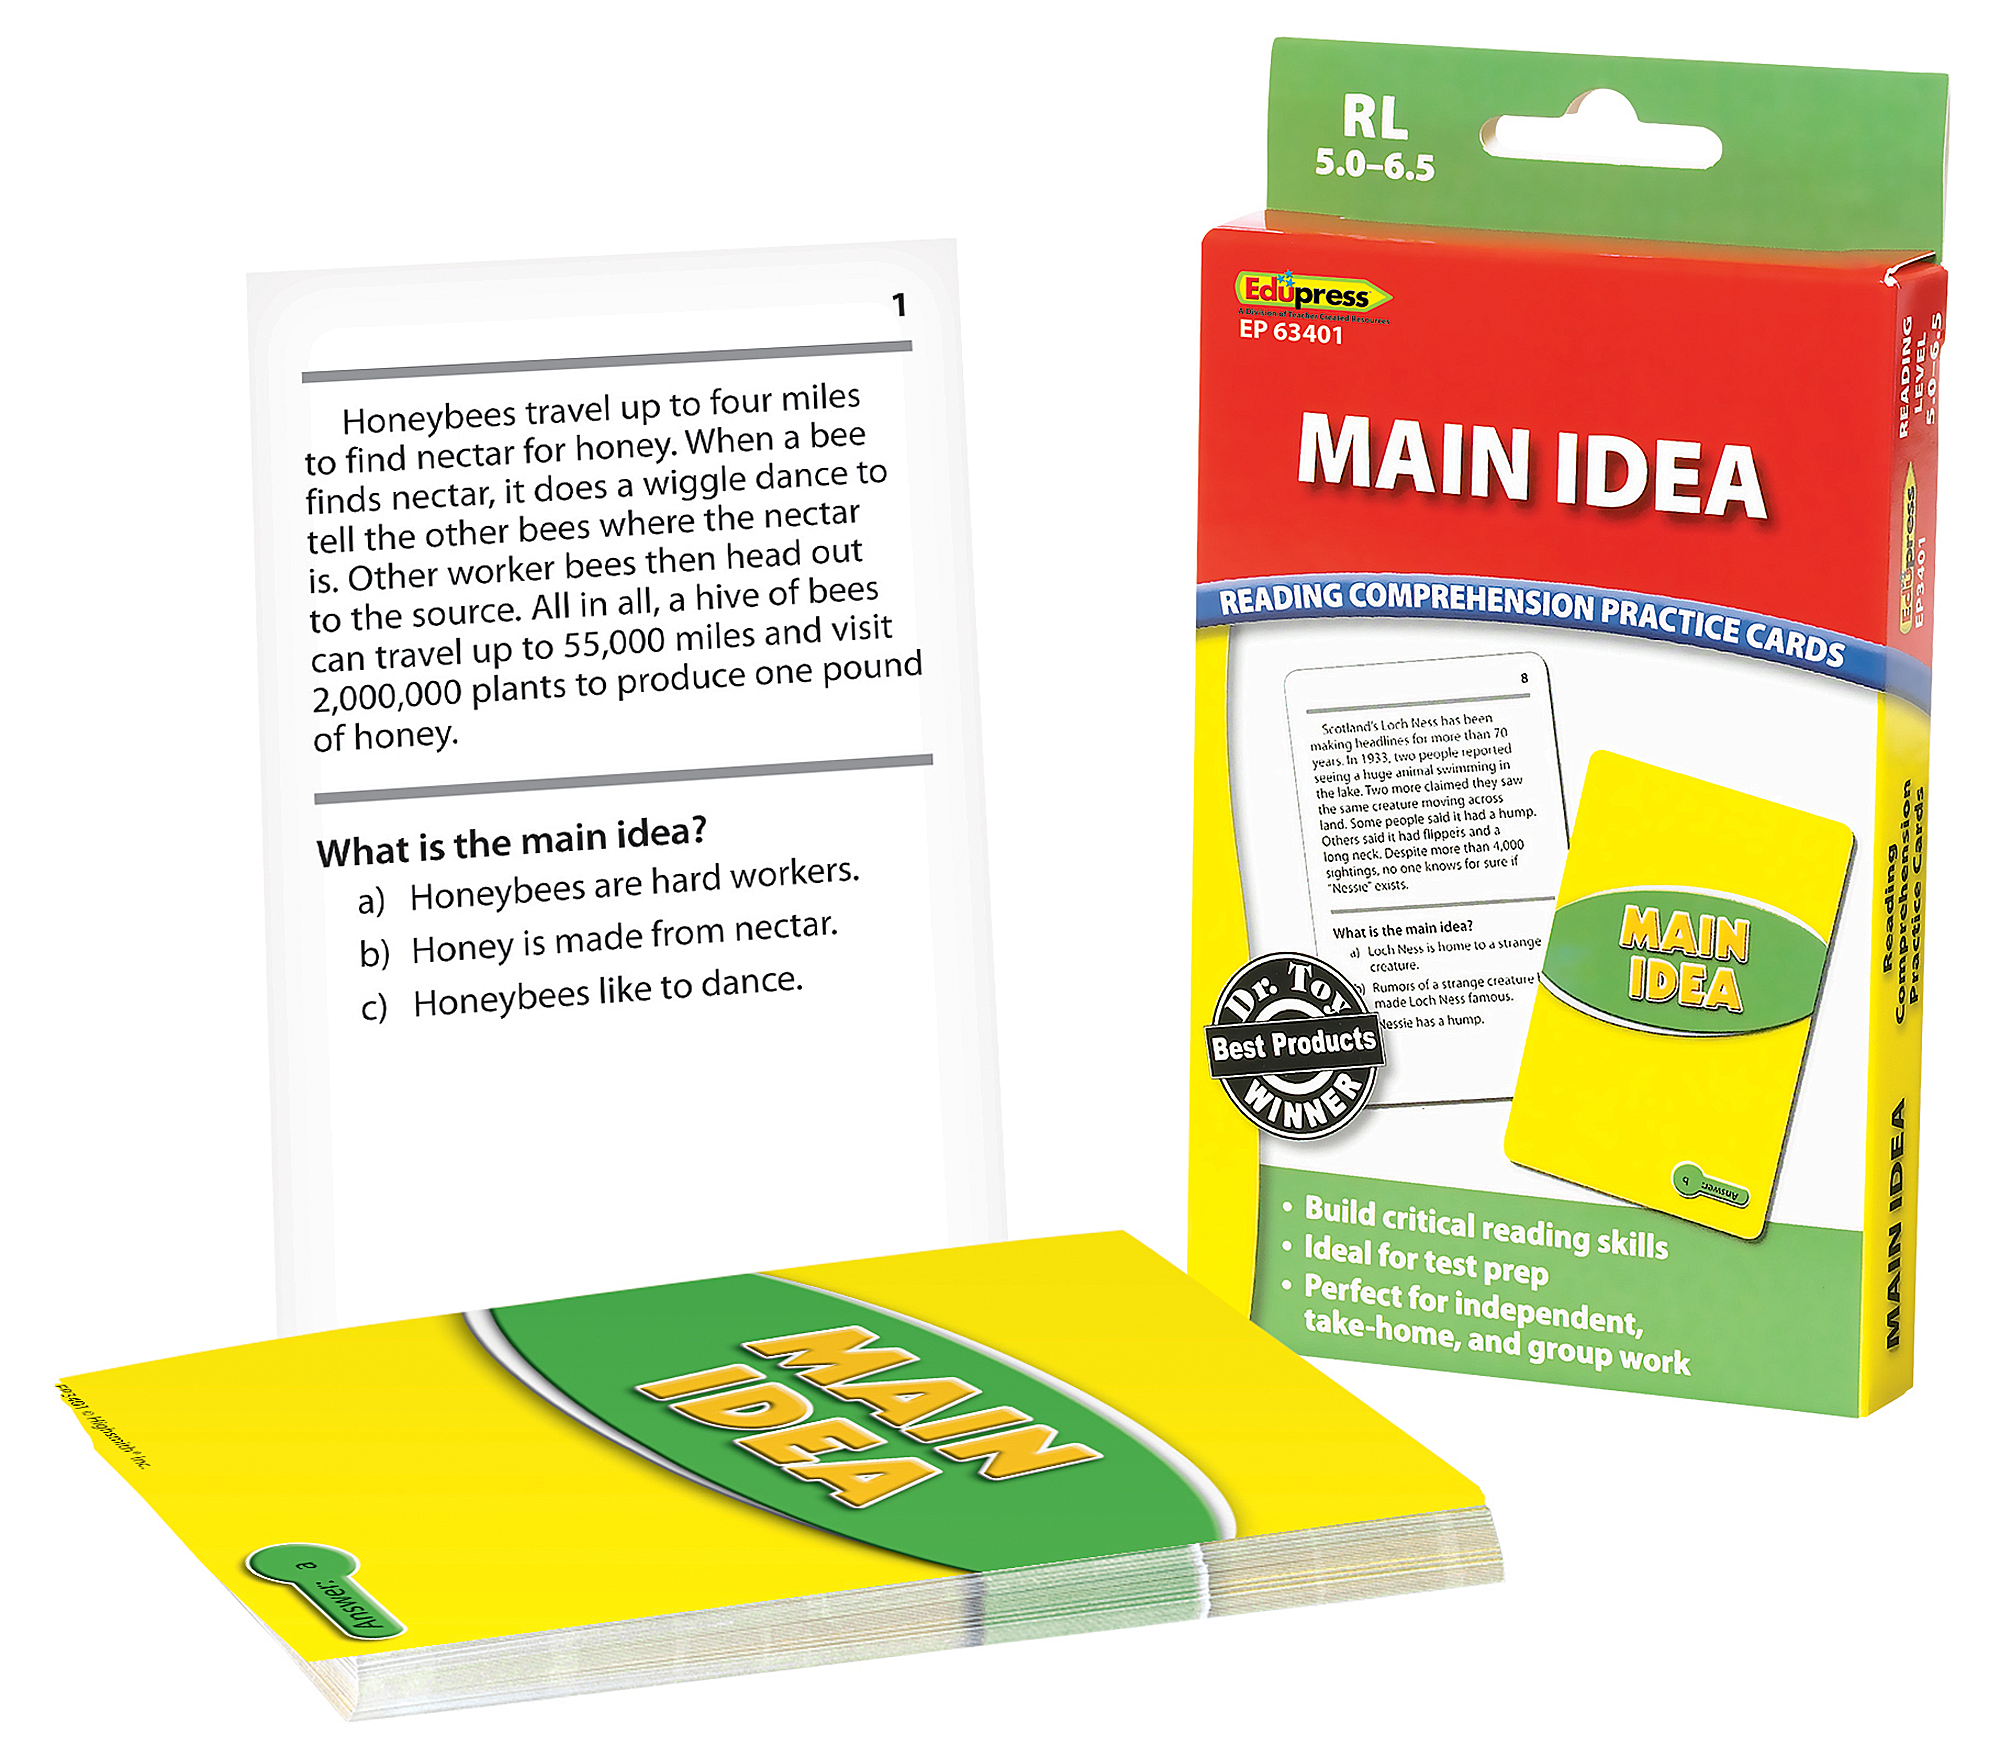 Reading Comprehension Practice Cards: Main Idea (Green Level)